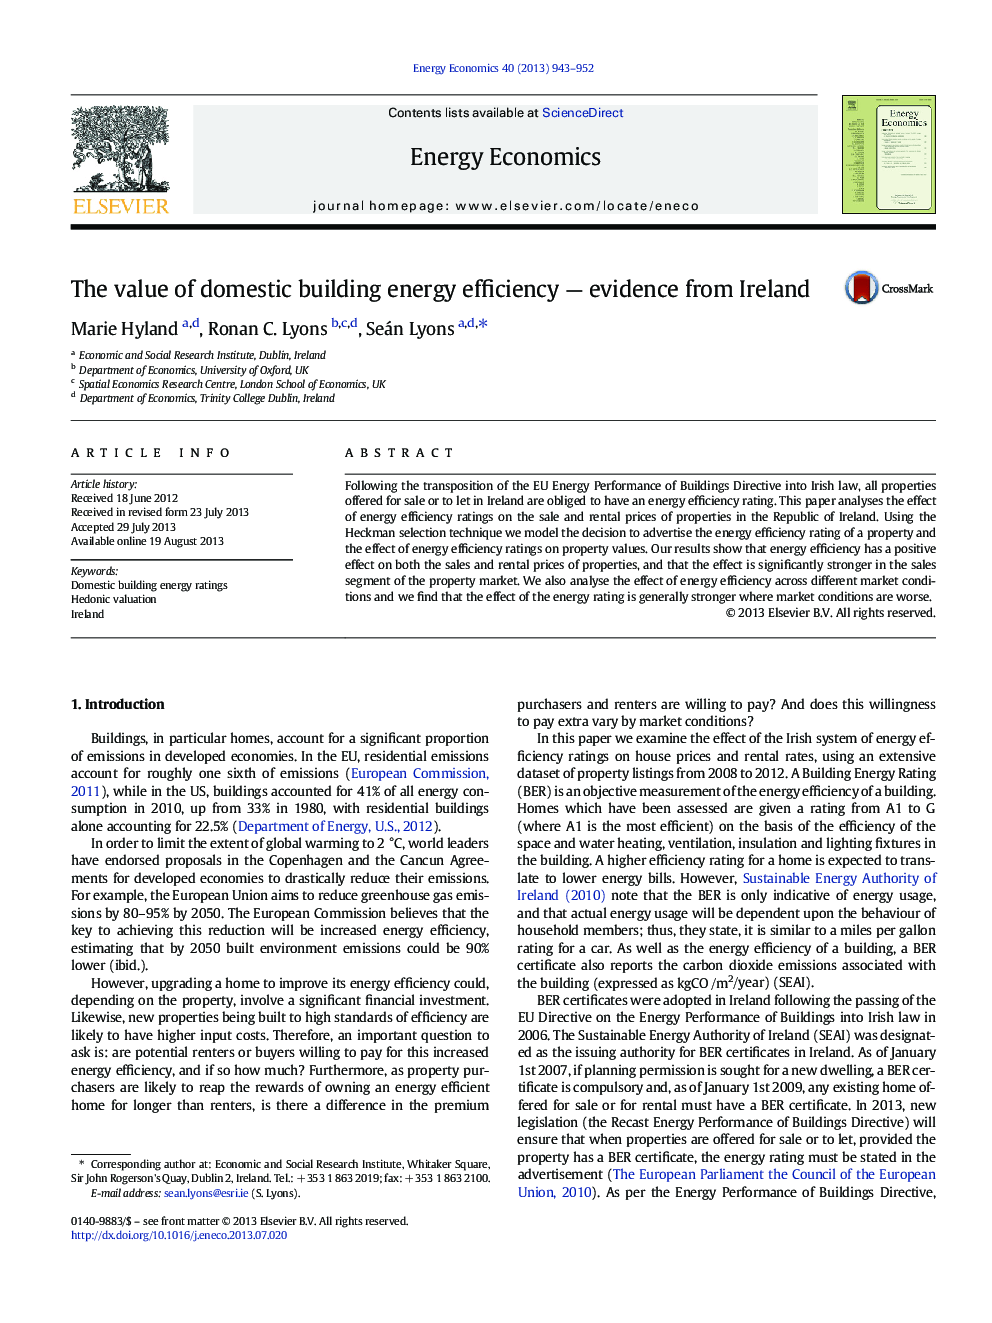 The value of domestic building energy efficiency - evidence from Ireland